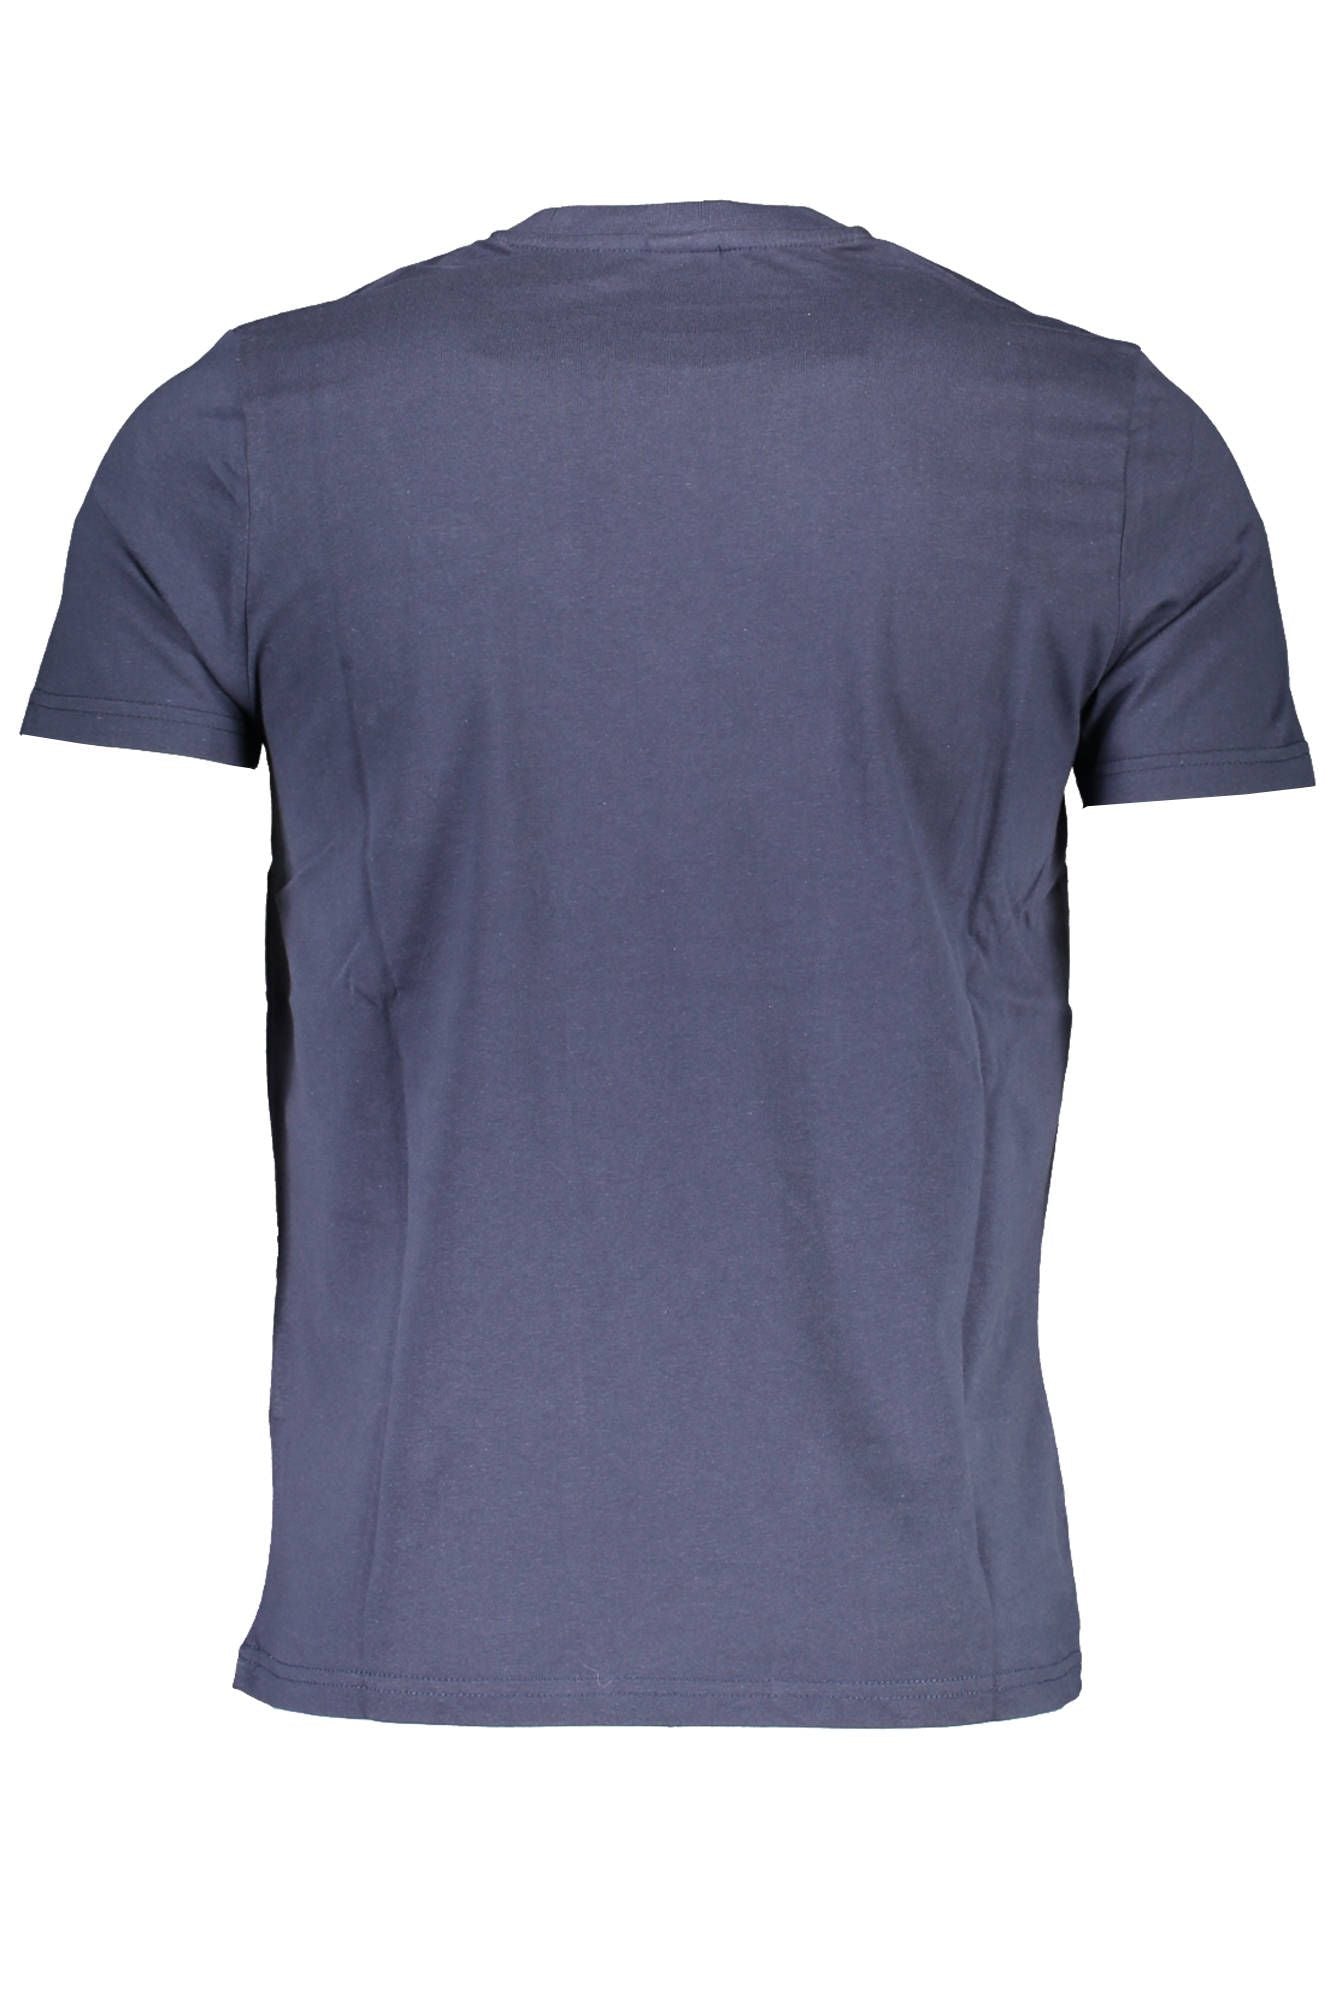 North Sails Blue Cotton Casual Round Neck Tee